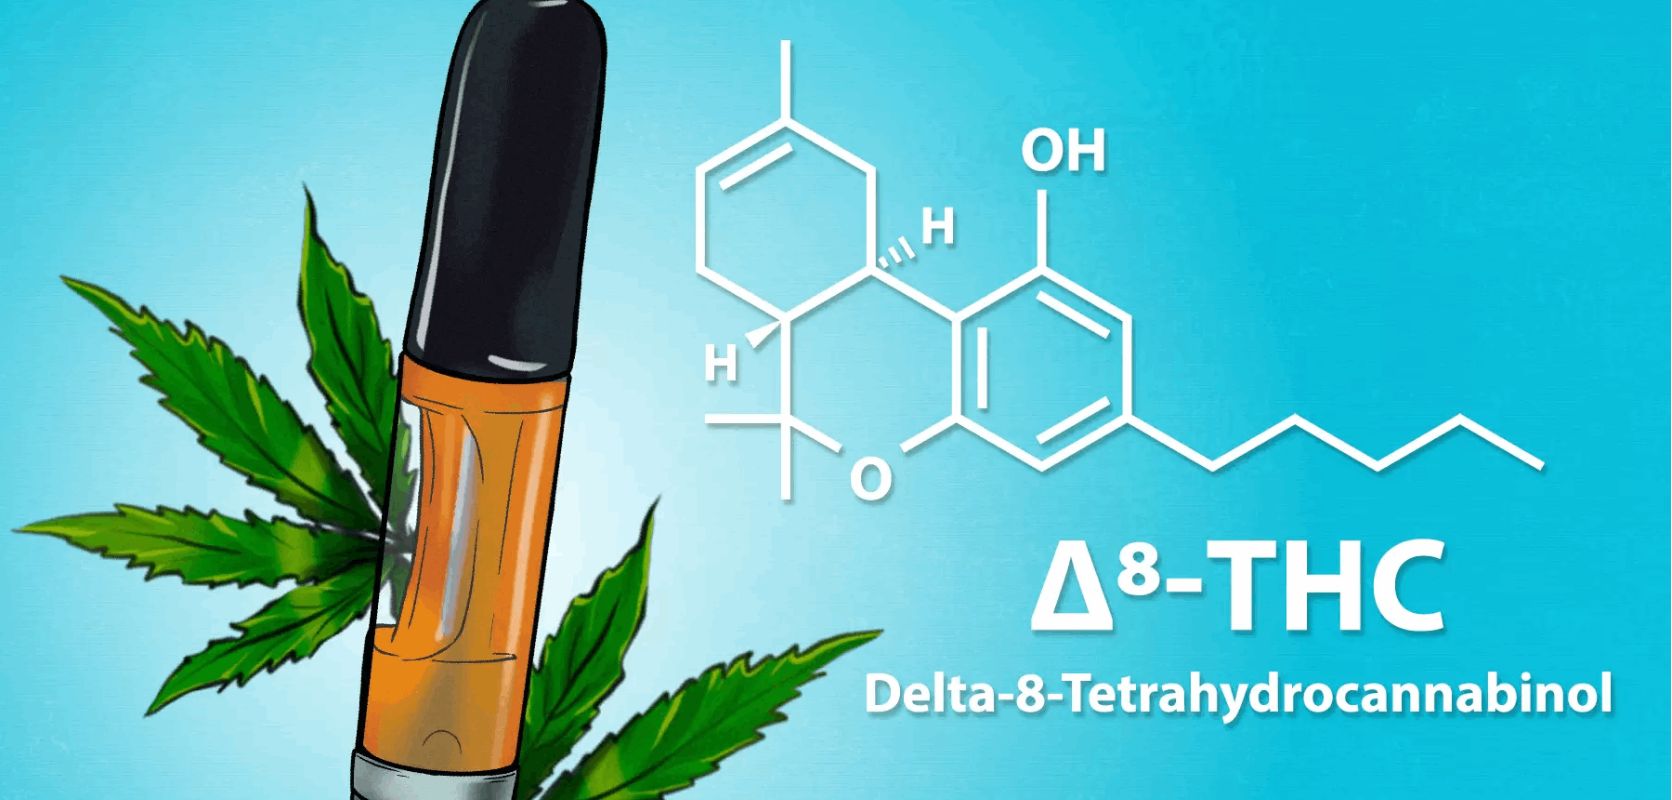 Are you looking to buy Delta 8 THC in Canada? Congratulations on your shopping decision! However, if you're new to this exciting cannabis compound, there are some essential facts you should know first.